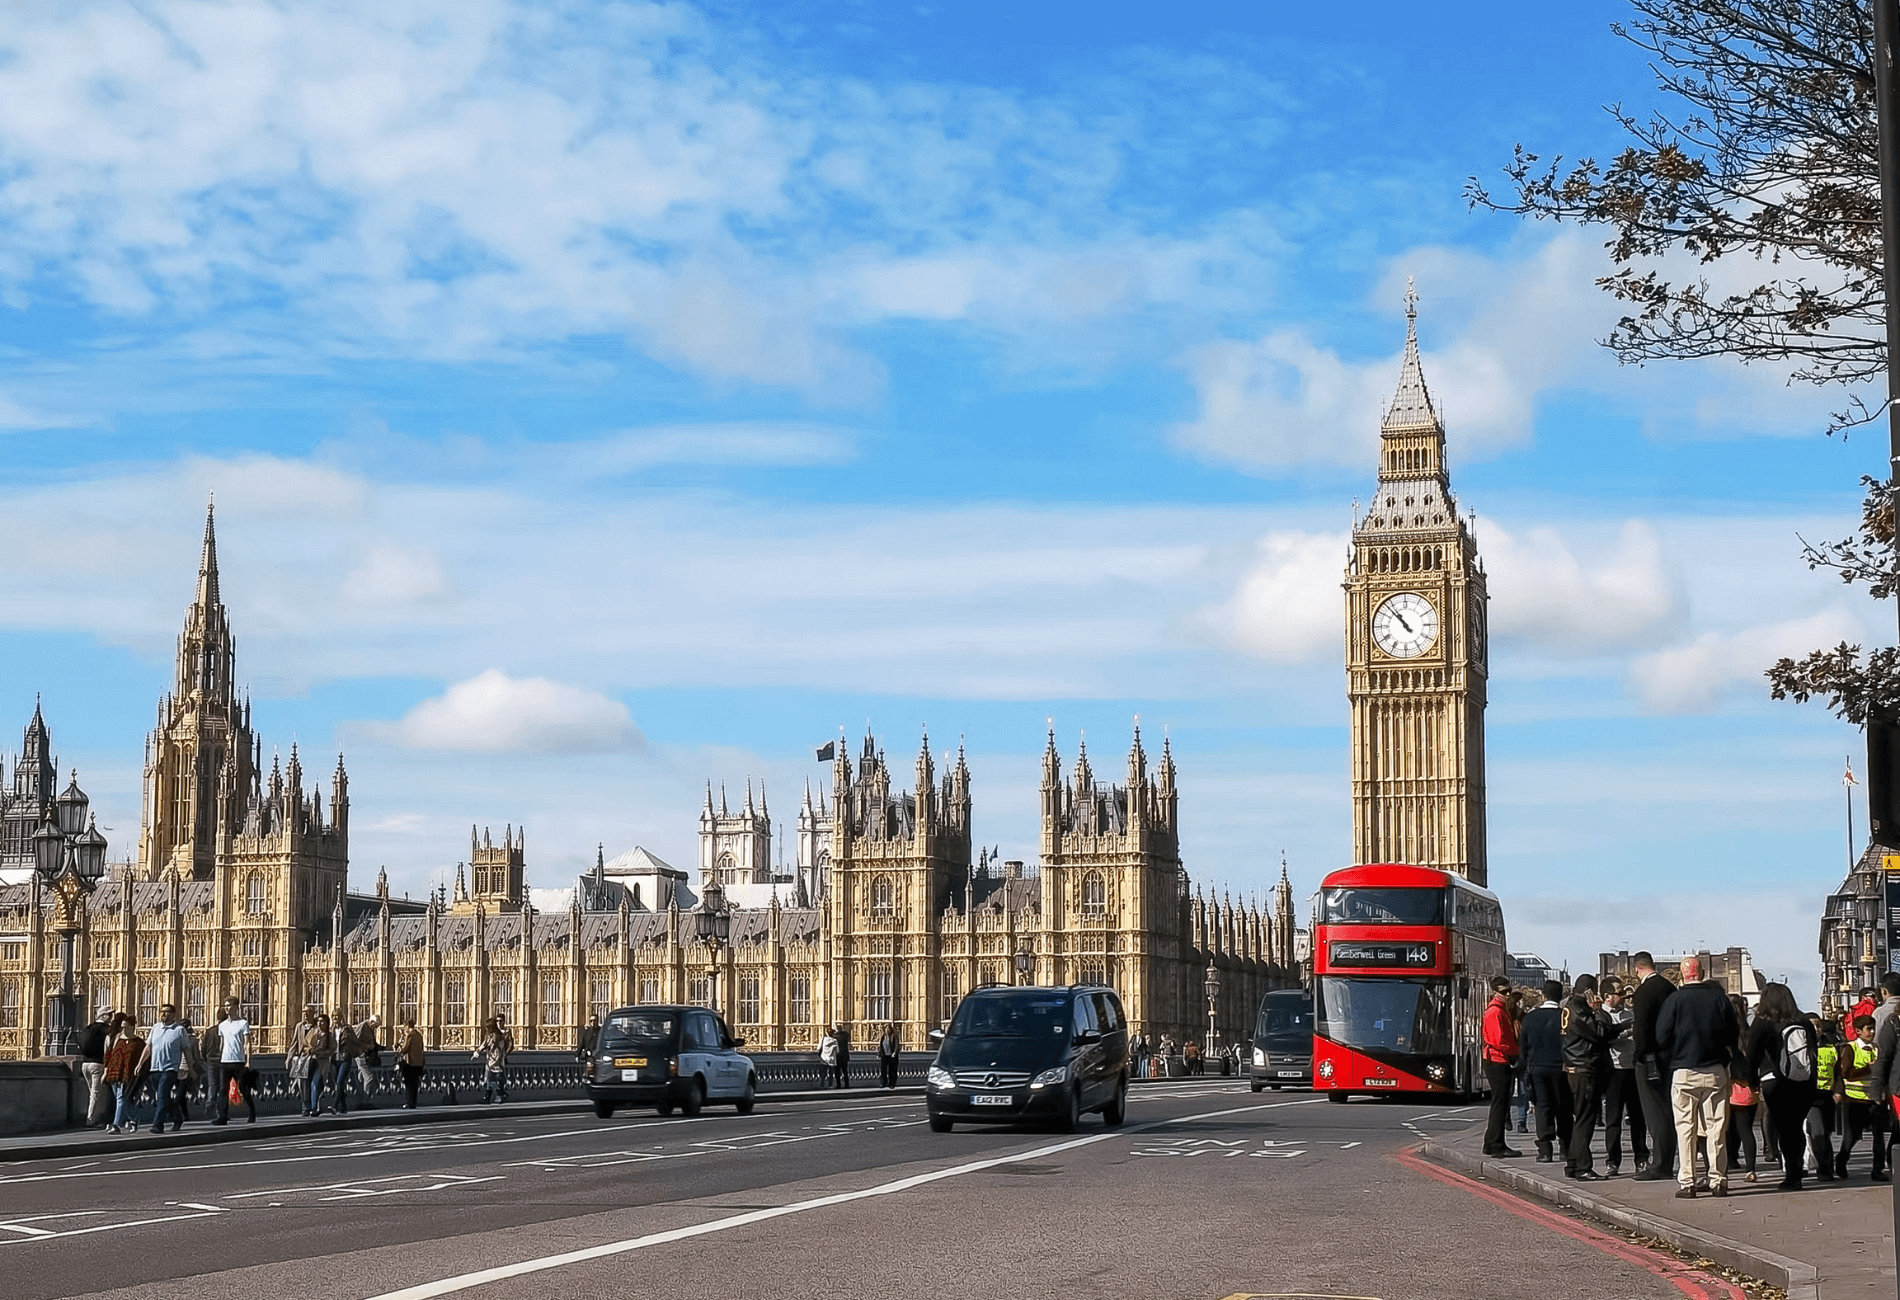 Photo of a London street with a red double decker bus in the foreground and Big Ben in the background